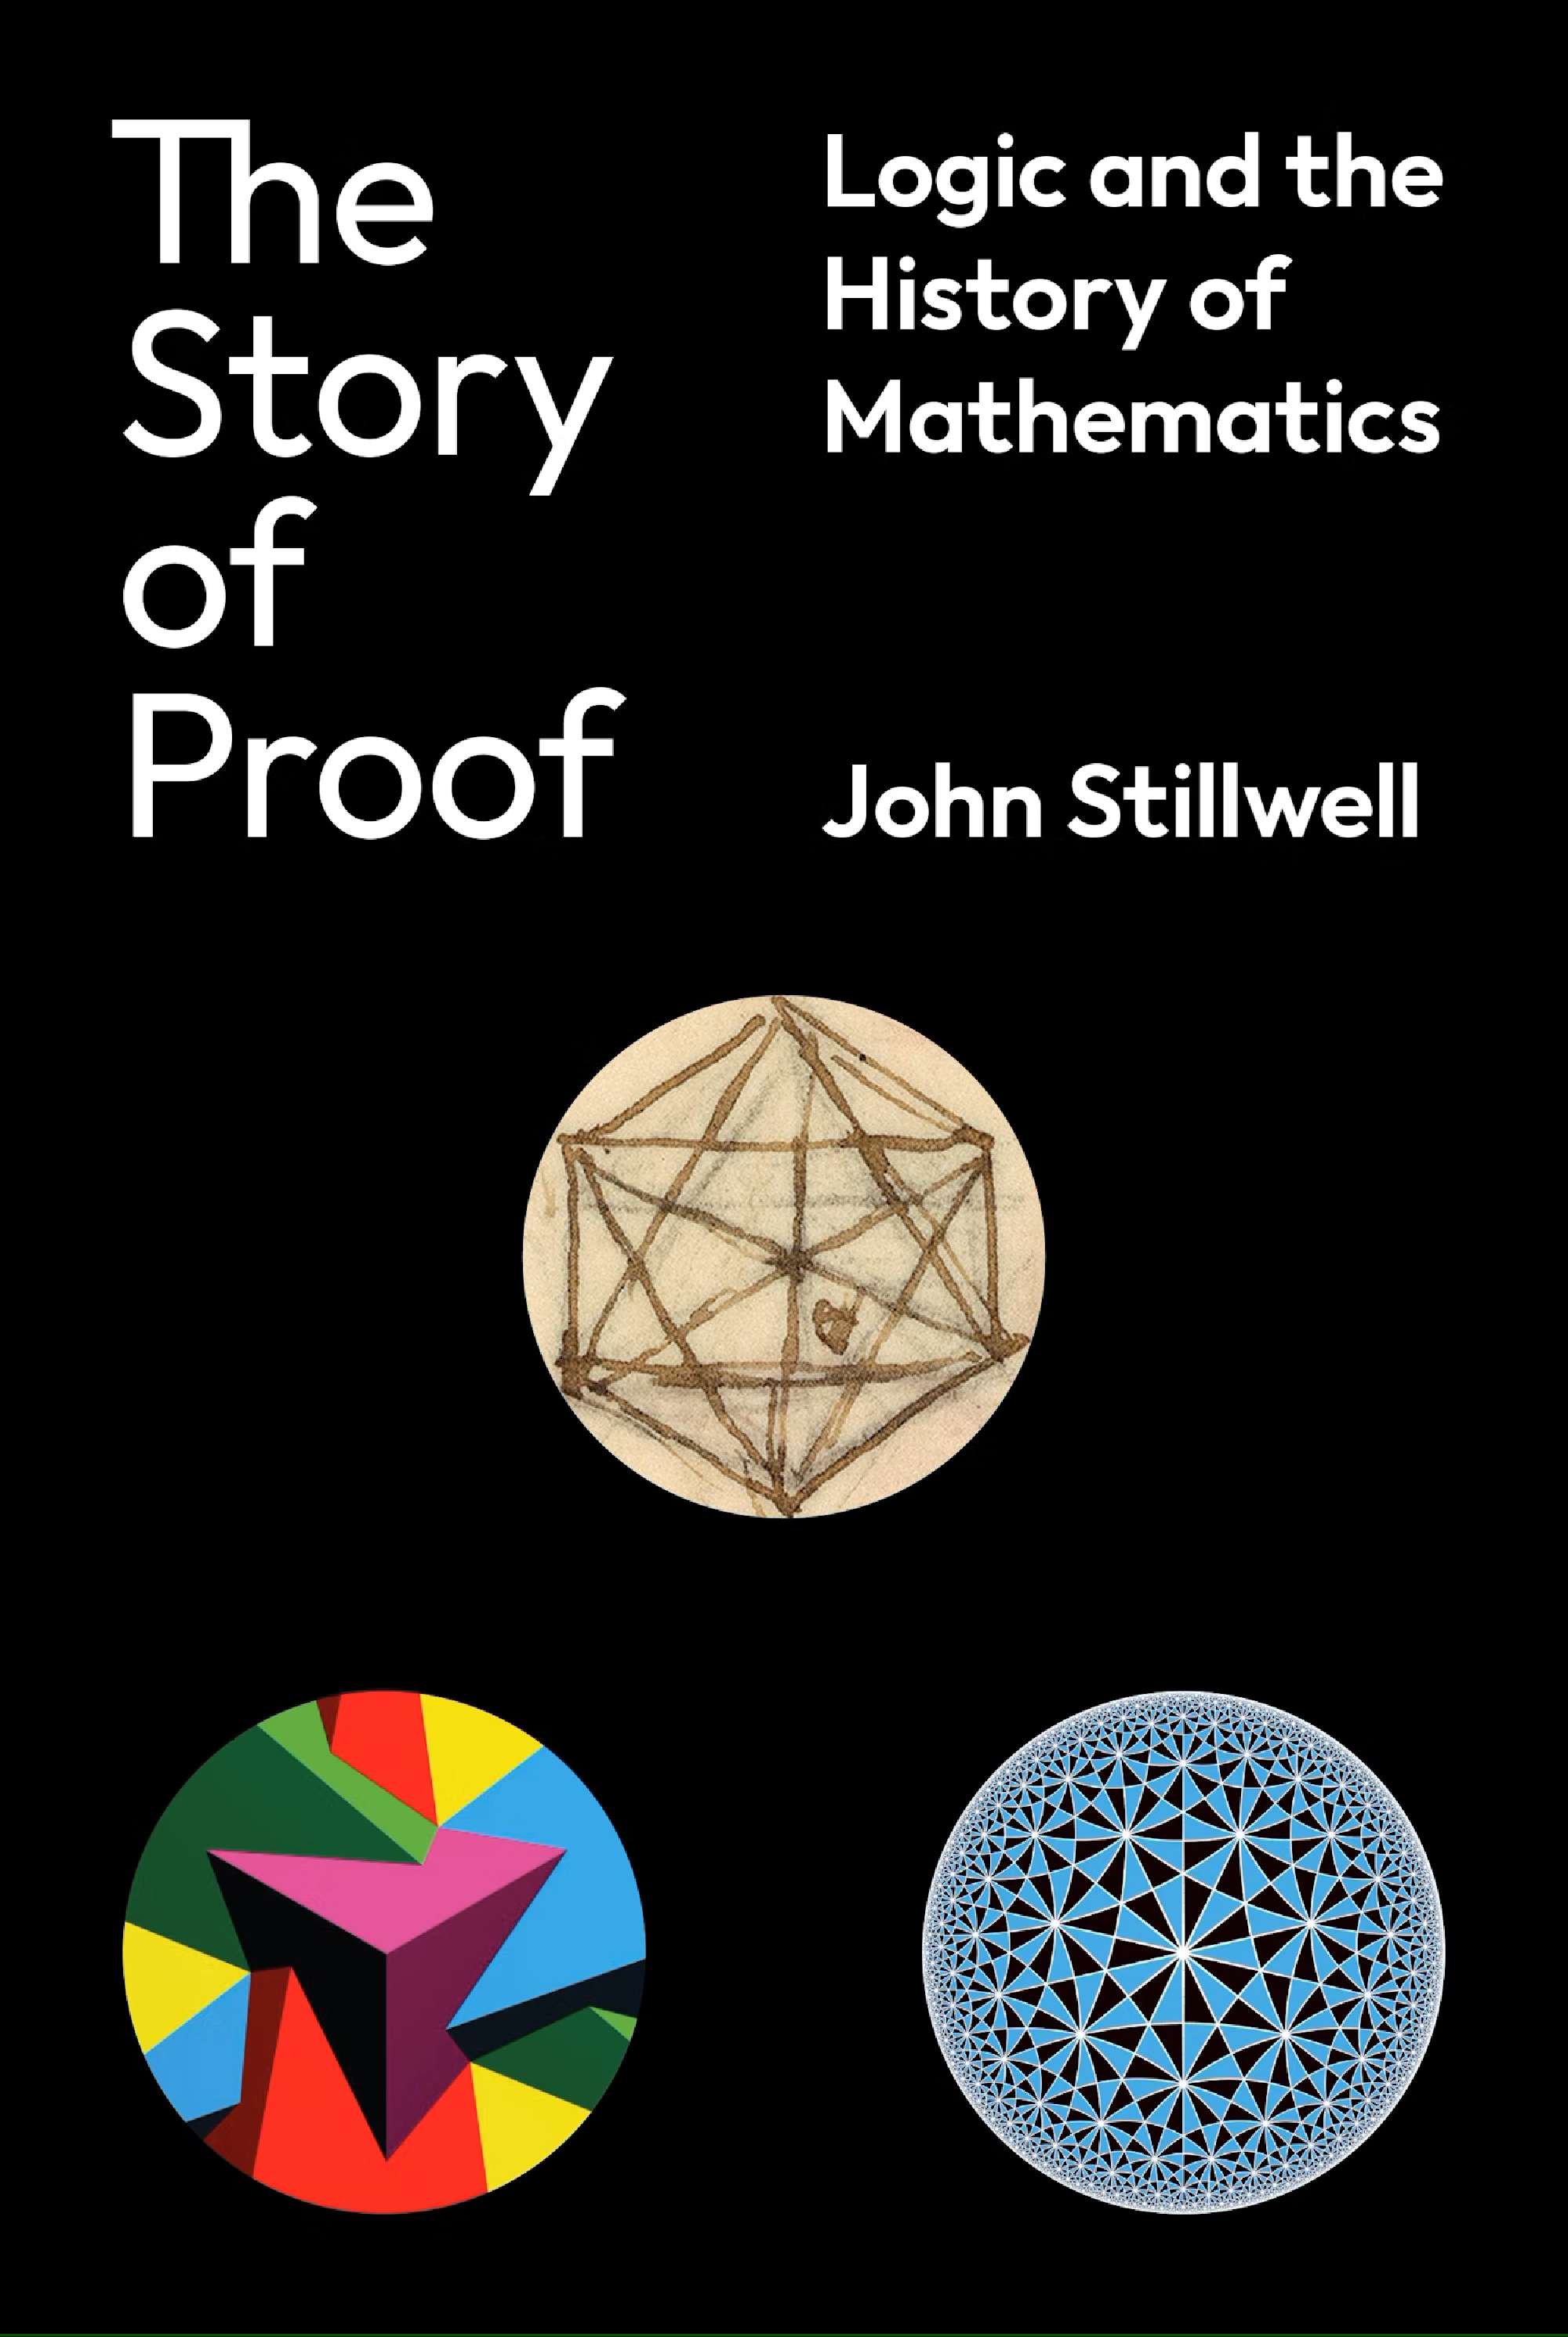 Book review: “The Story of Proof” by John Stillwell